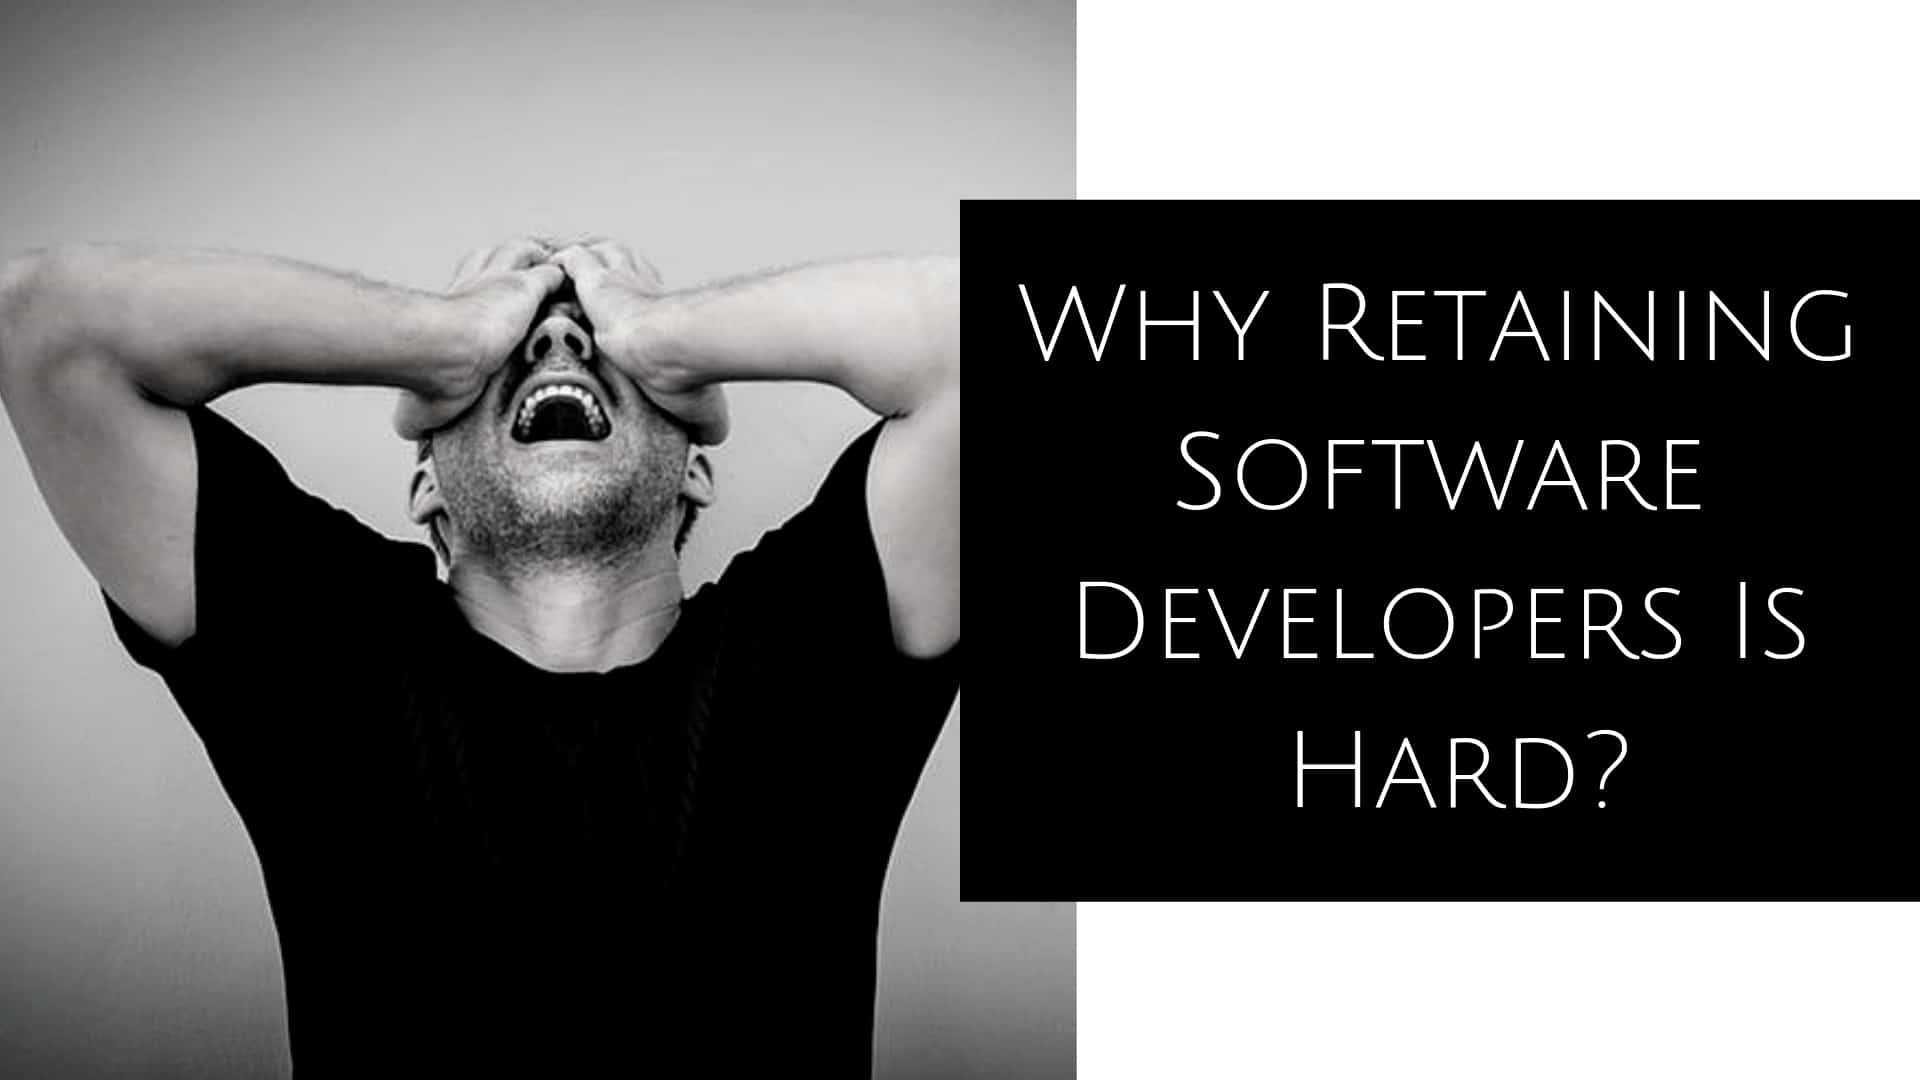 Why Retaining Software Developers Is Hard?